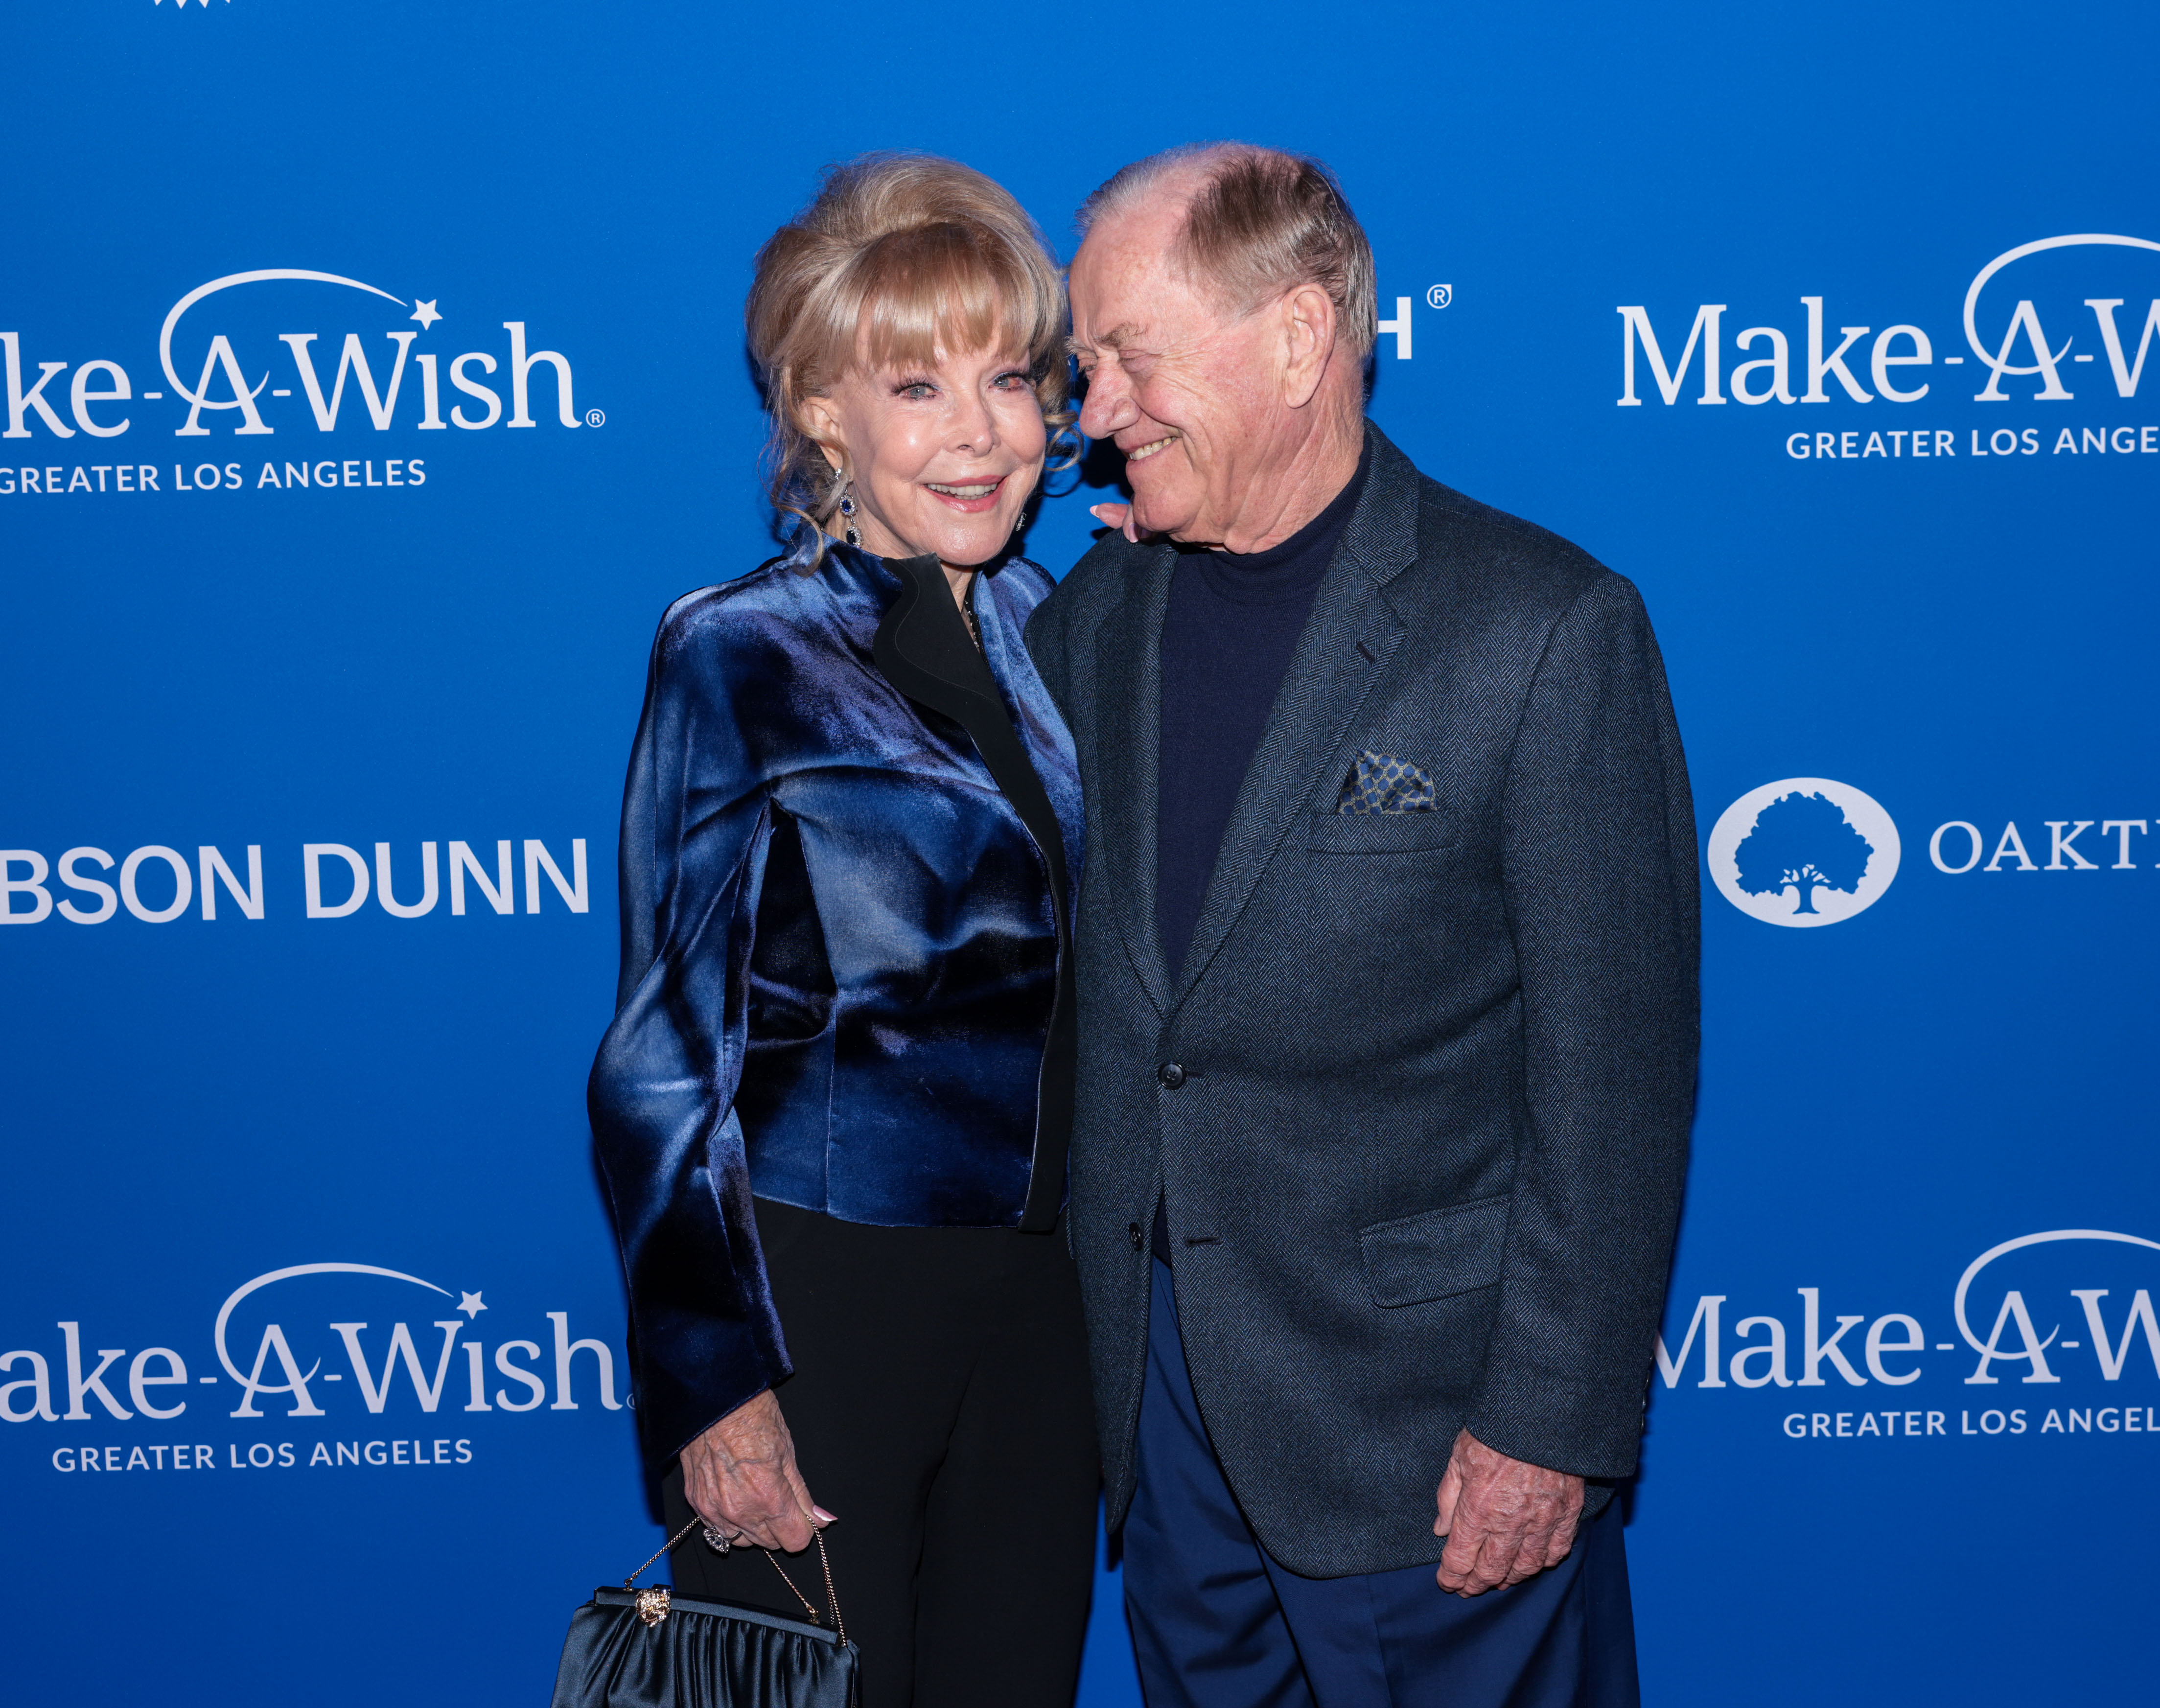 Barbara Eden and John Eicholtz attend the Make-A-Wish Greater Los Angeles 2022 Wish Gala on November 19, 2022 in Hollywood, California | Source: Getty Images